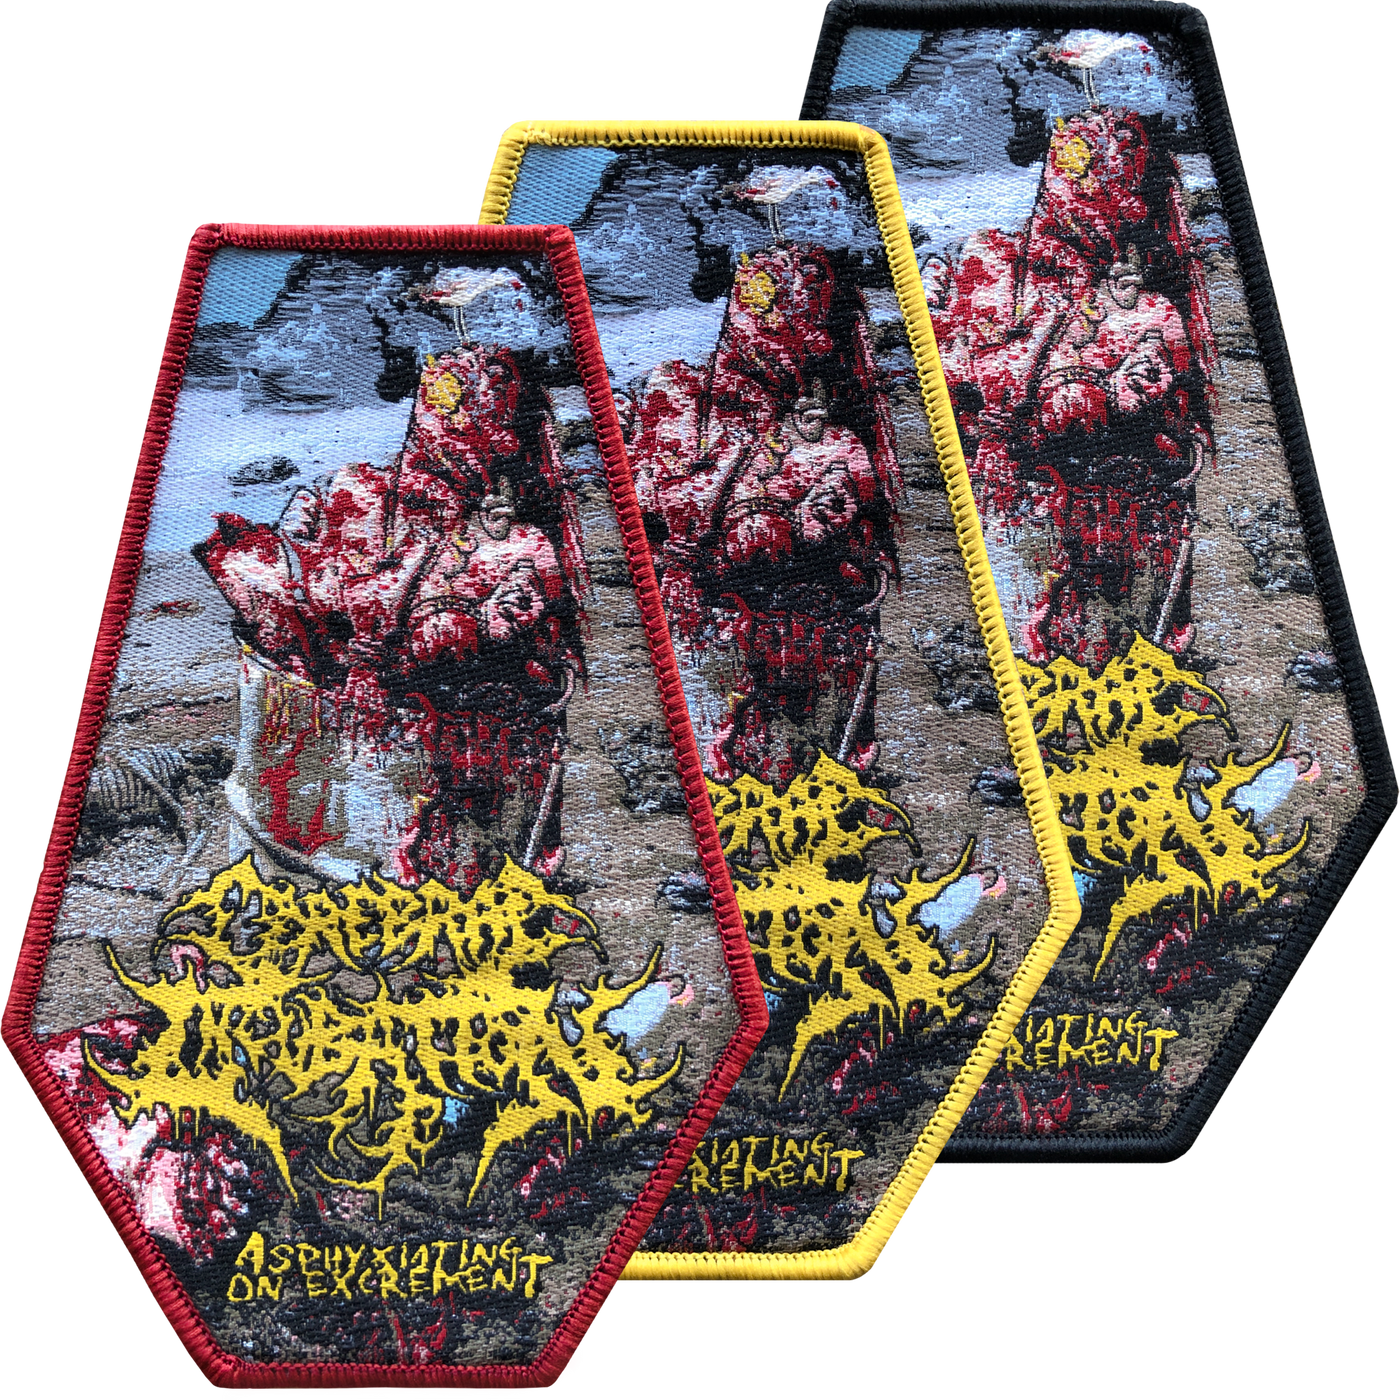 Cerebral Incubation 'Asphyxiating On Excrement' Patch